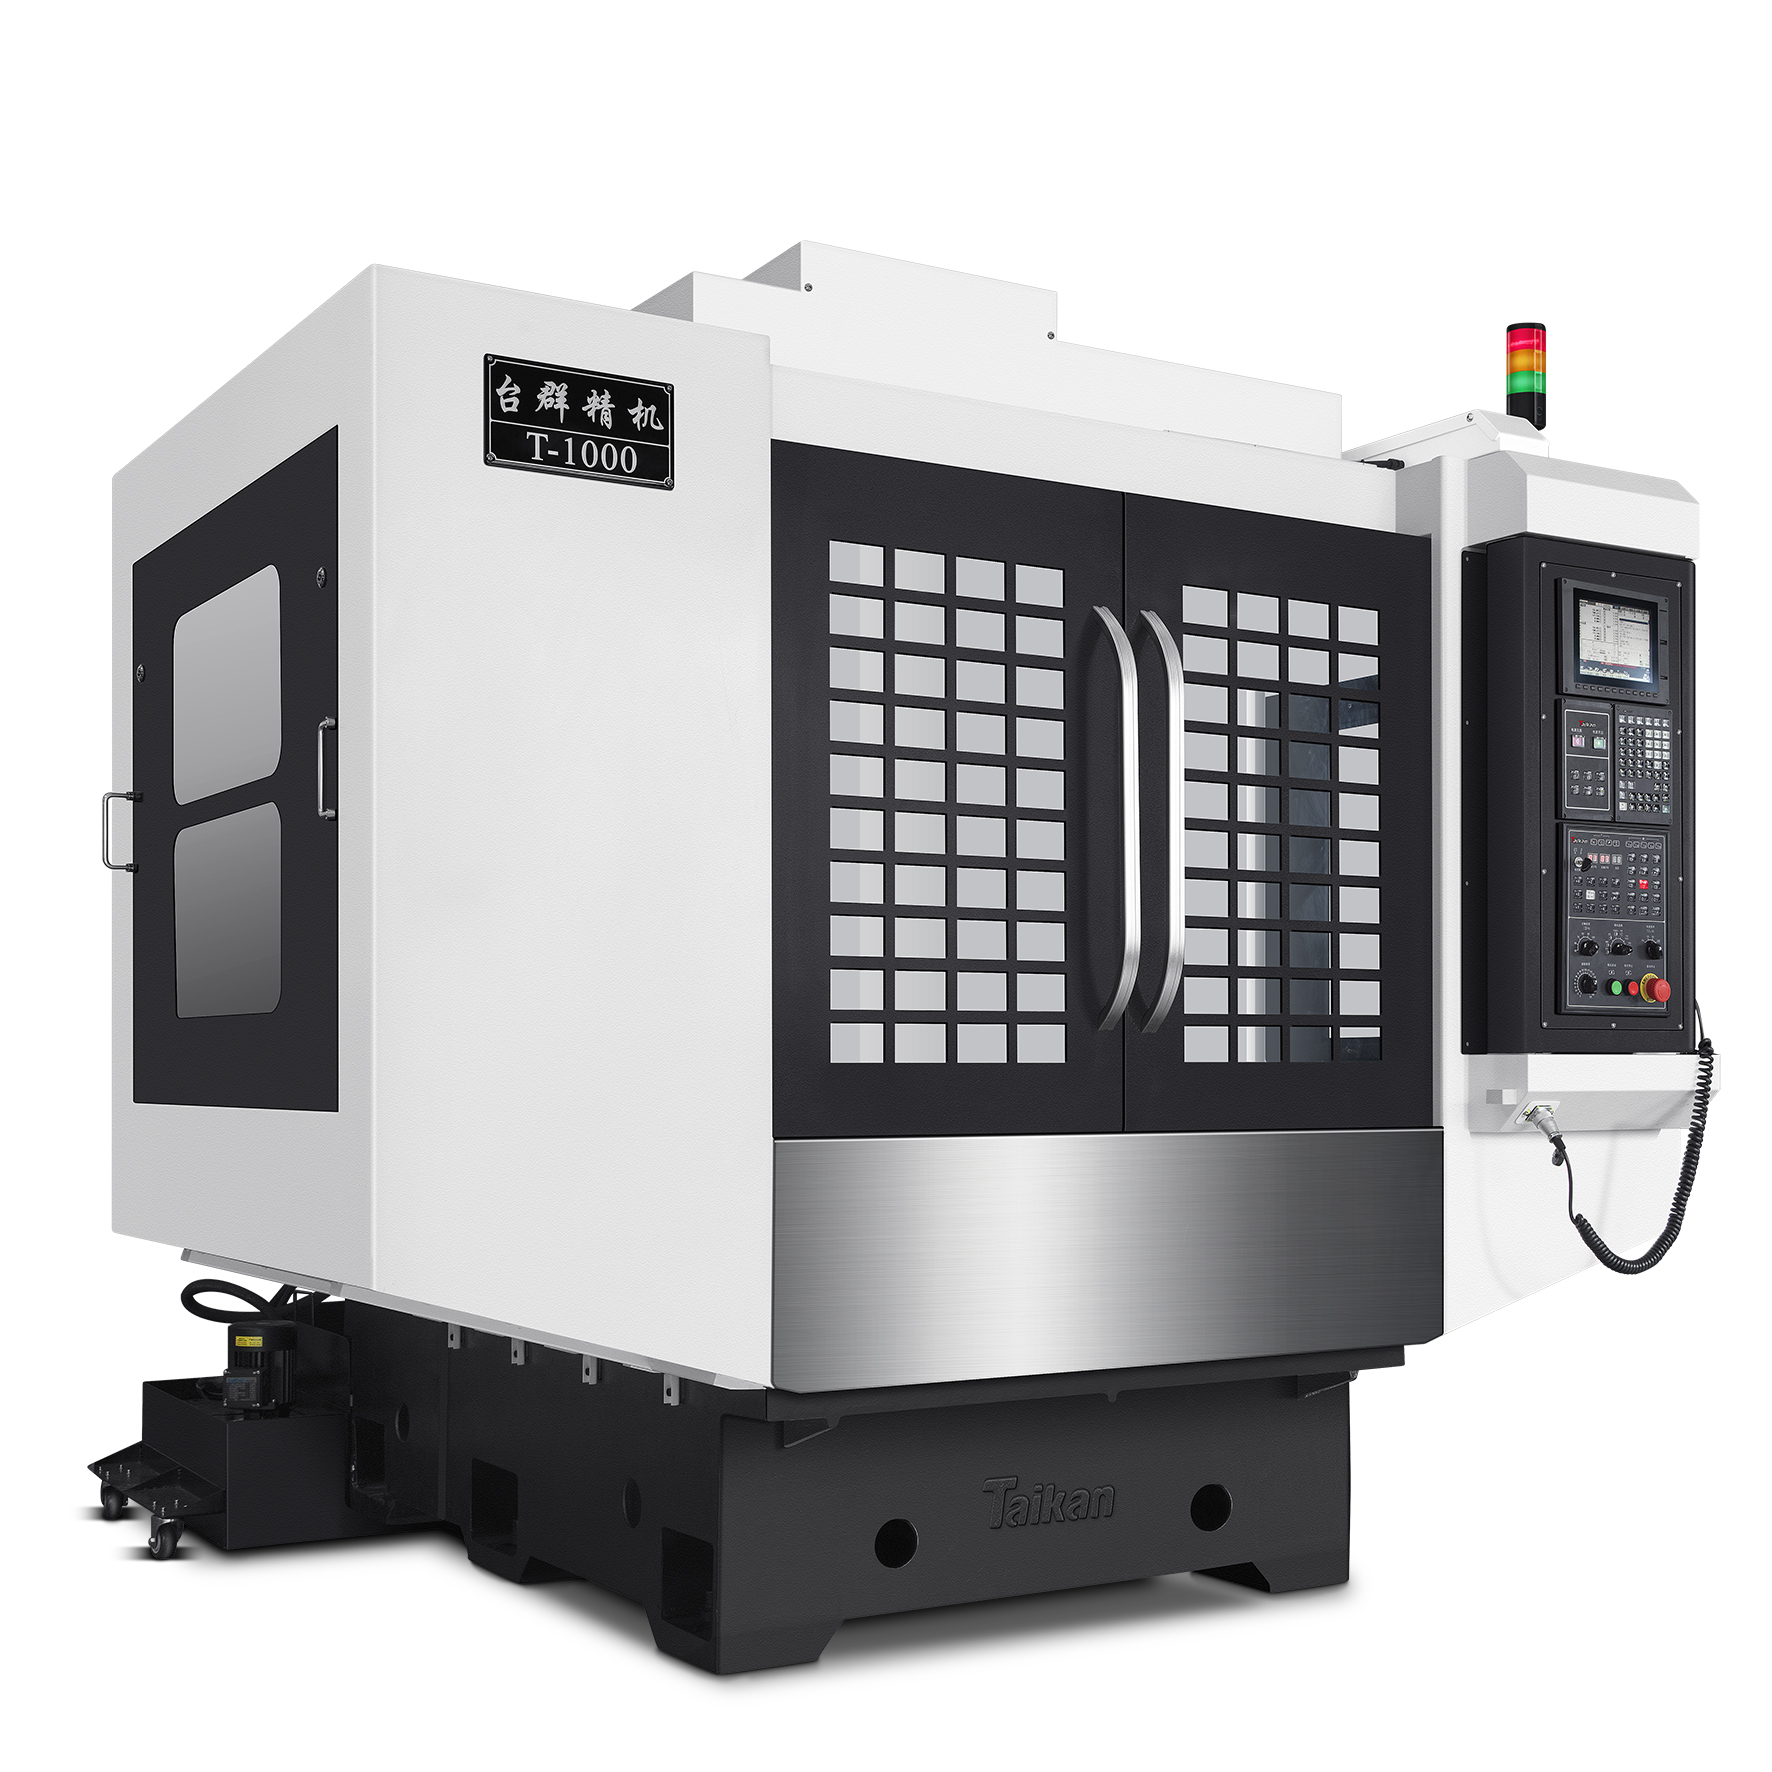 T-1000 drilling and tapping machining center